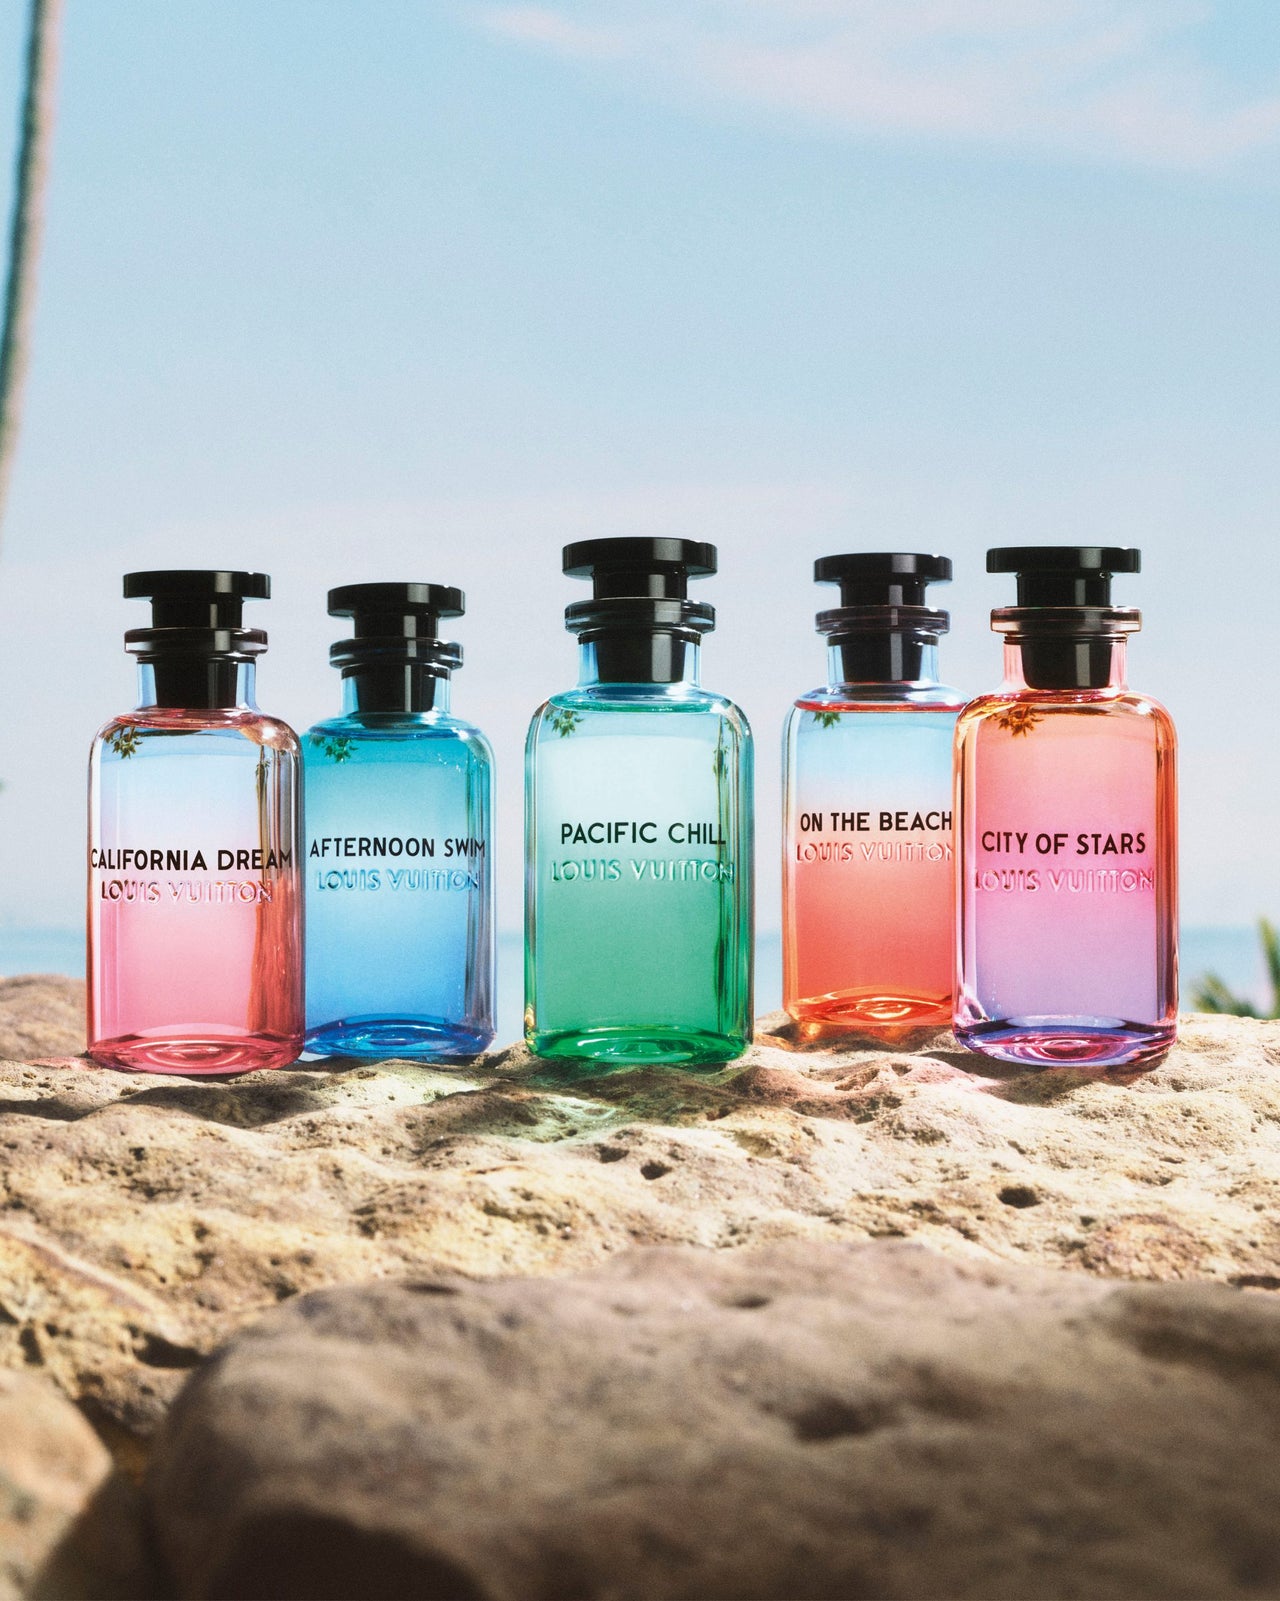 Louis Vuitton's New Fragrance Pacific Chill Was Inspired by Juice